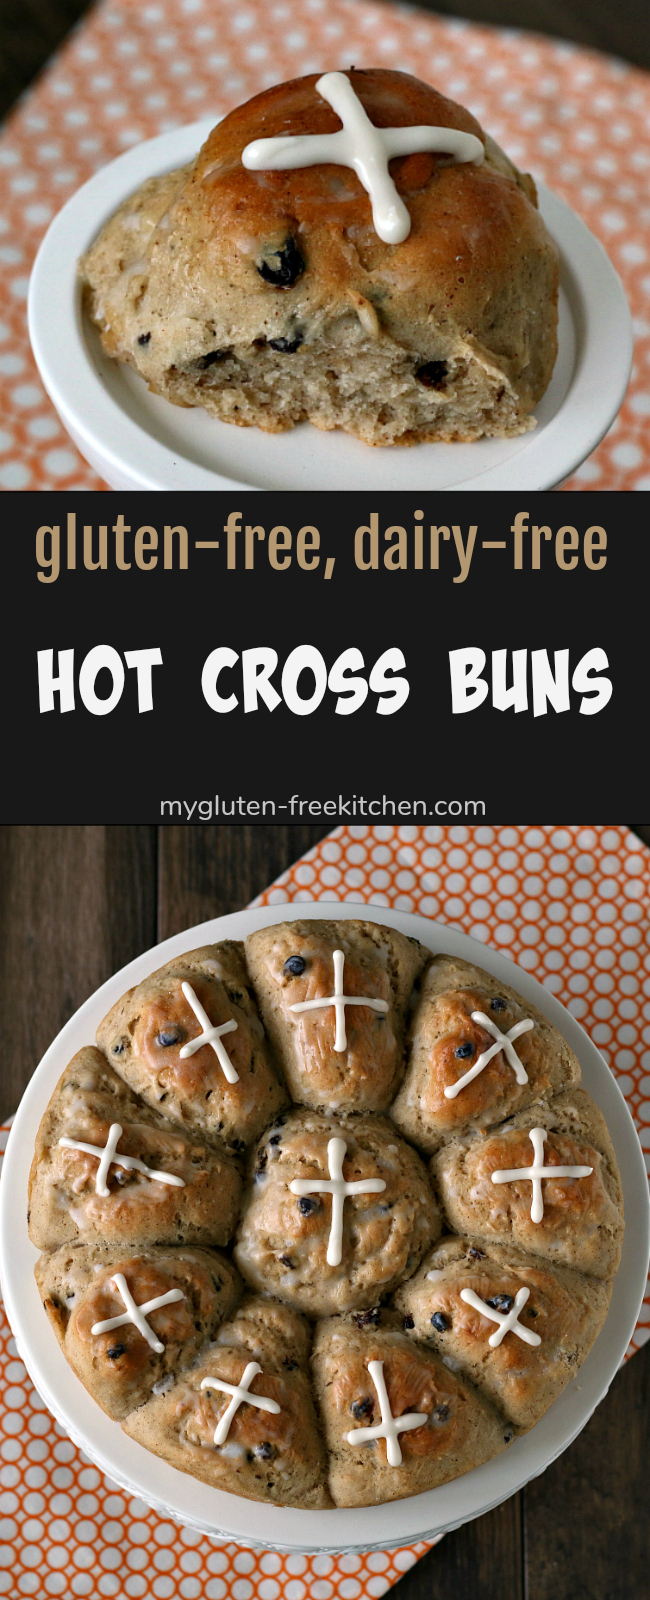 Gluten-free Hot Cross Buns recipe. Now you can make this Easter tradition gluten-free and dairy-free!